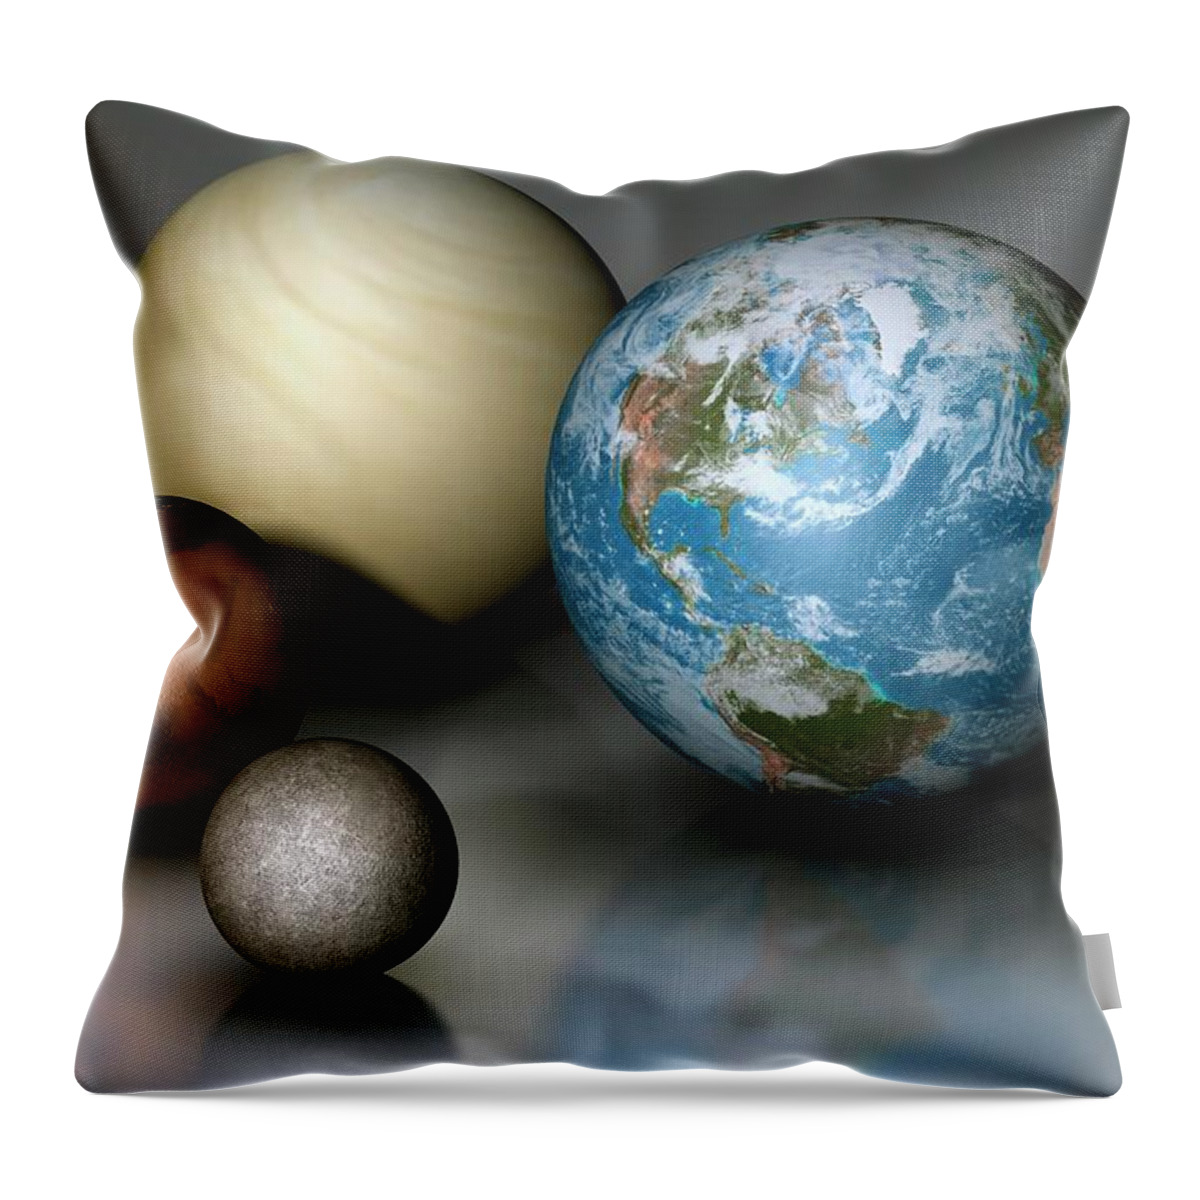 Scale Throw Pillow featuring the digital art Terrestrial Planets Compared by Mark Garlick